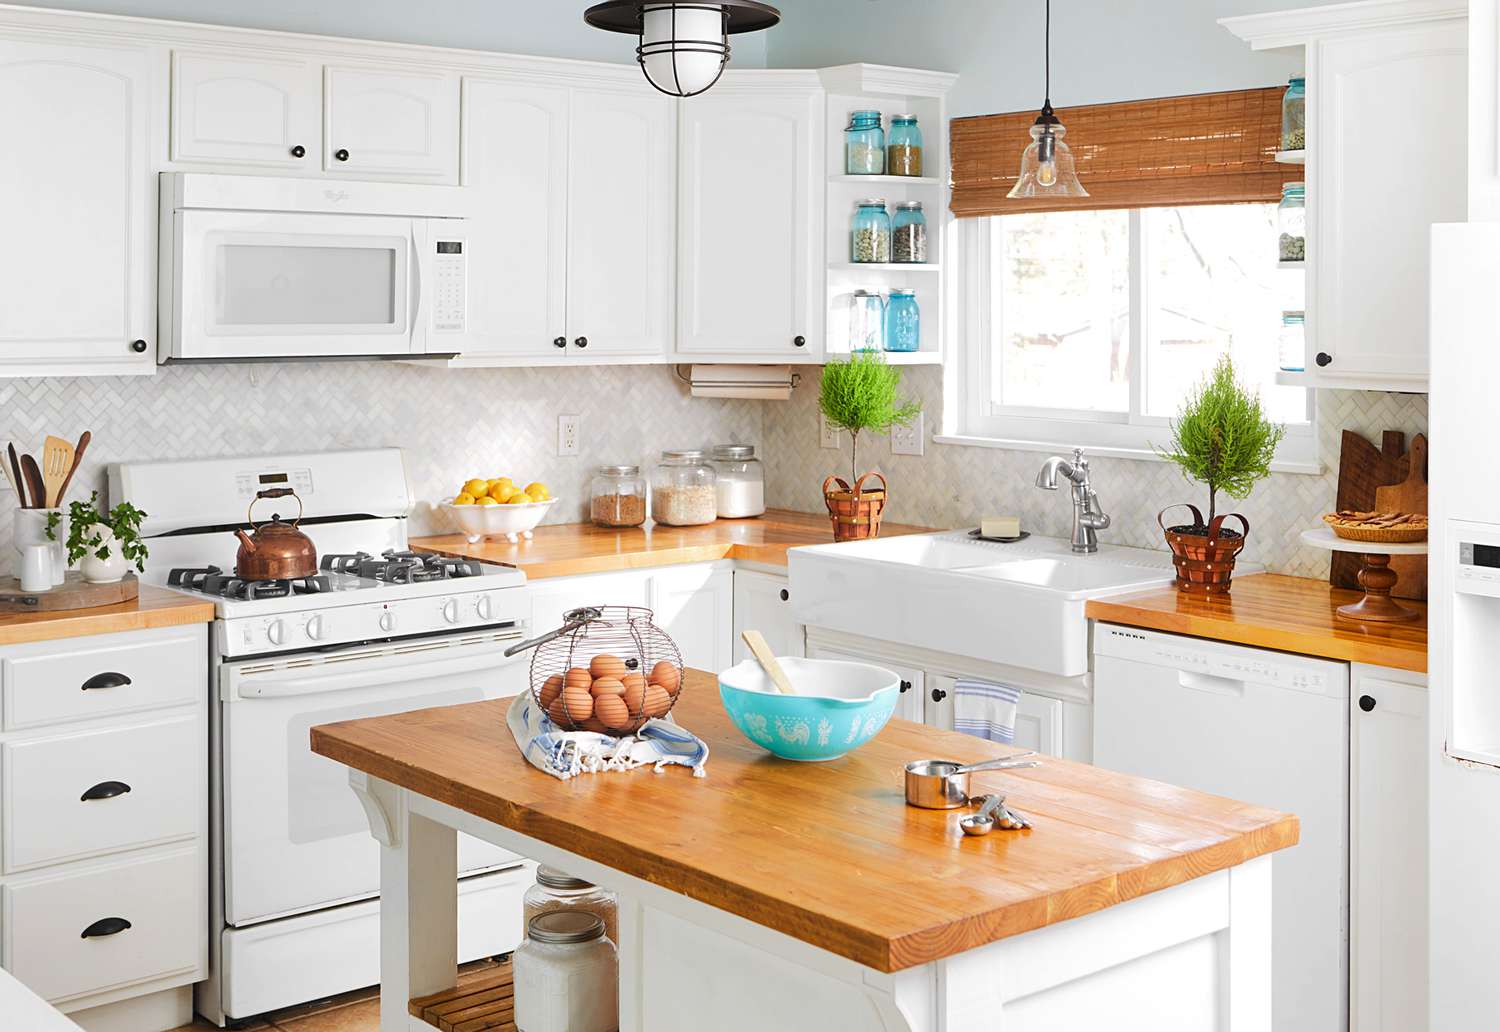 Our Favorite Budget Kitchen Remodeling Ideas Under $2,000 | Better ...